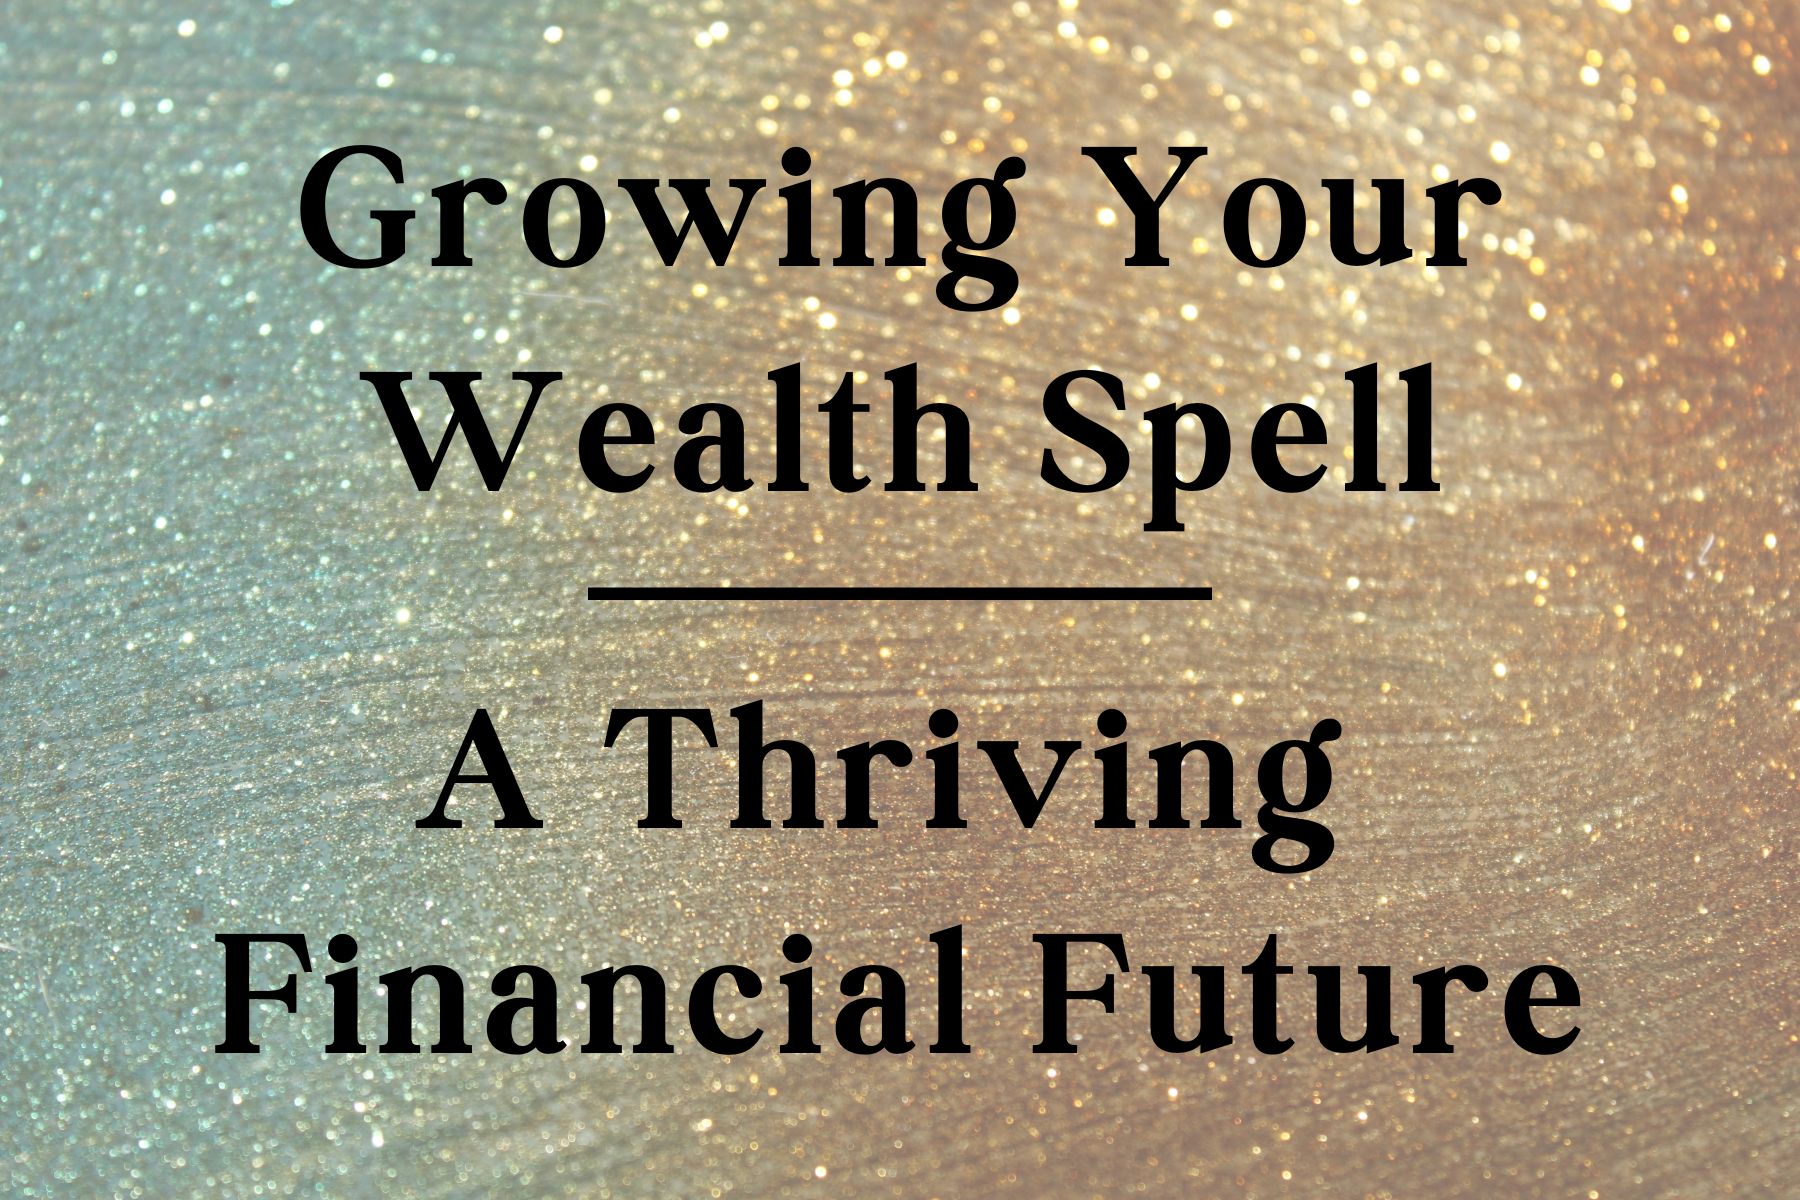 Growing Your Wealth: Spell for a Thriving Financial Future